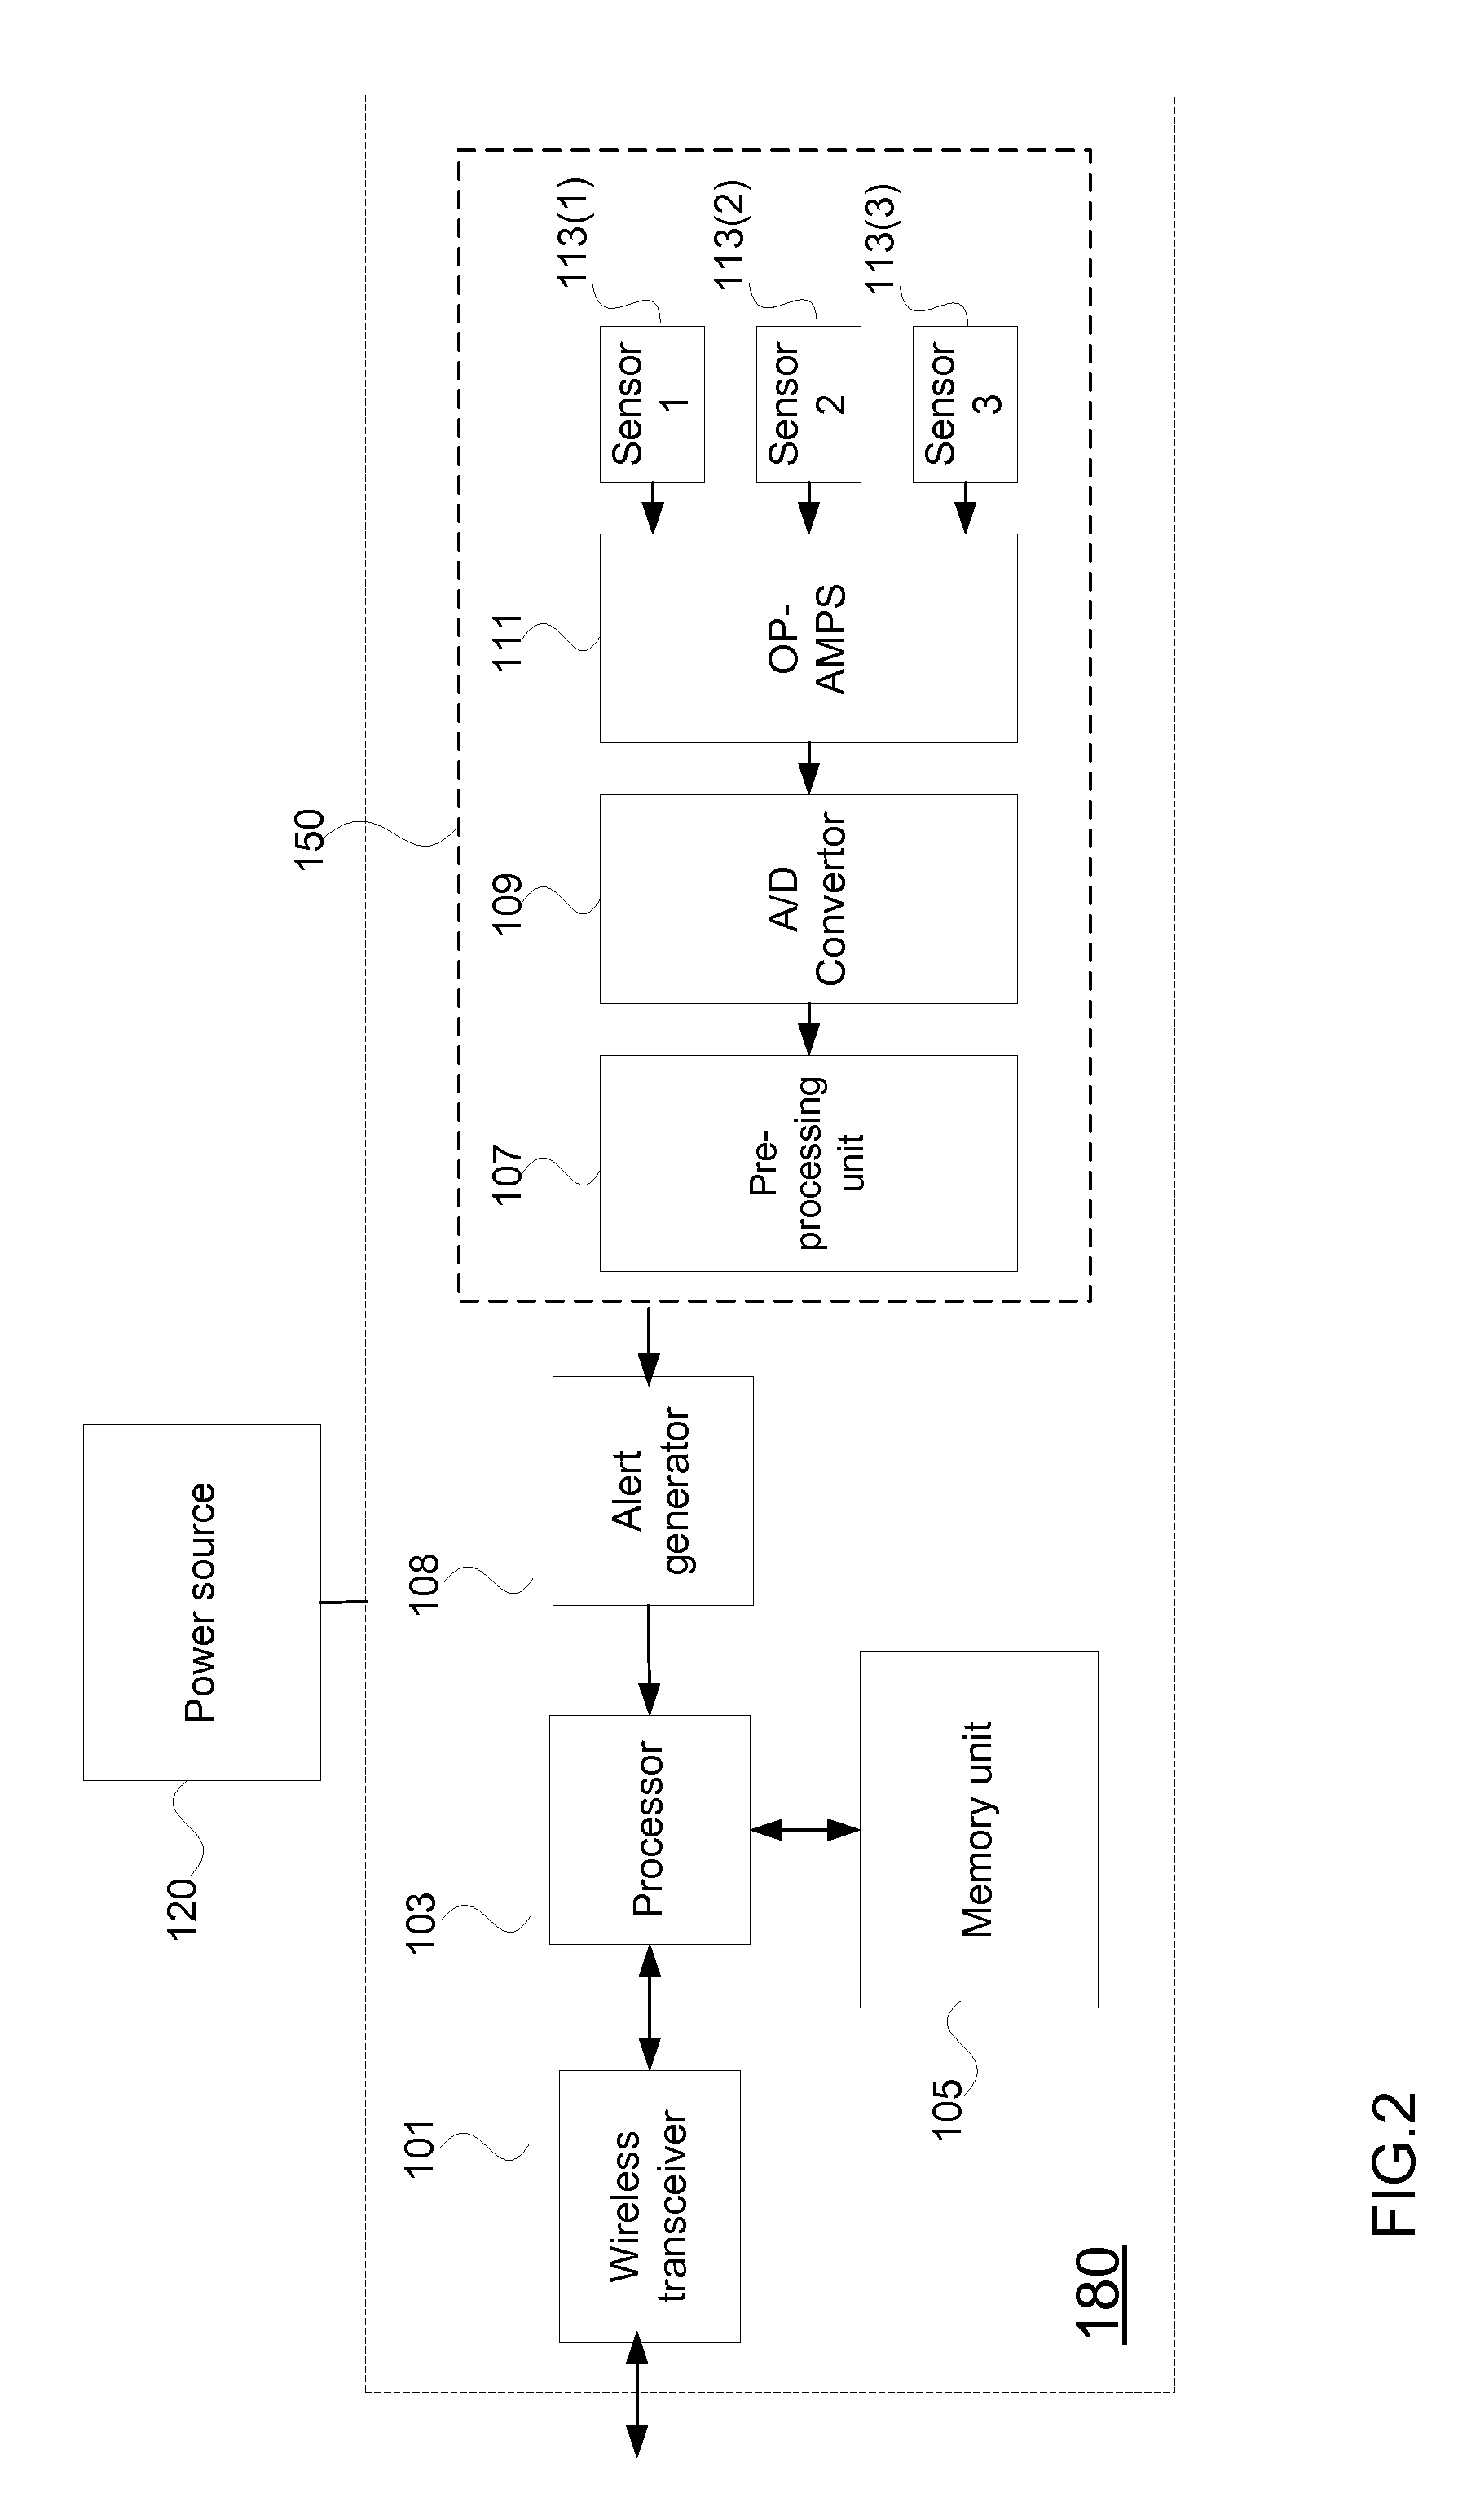 Adhesive bandage and a method for controlling patient information